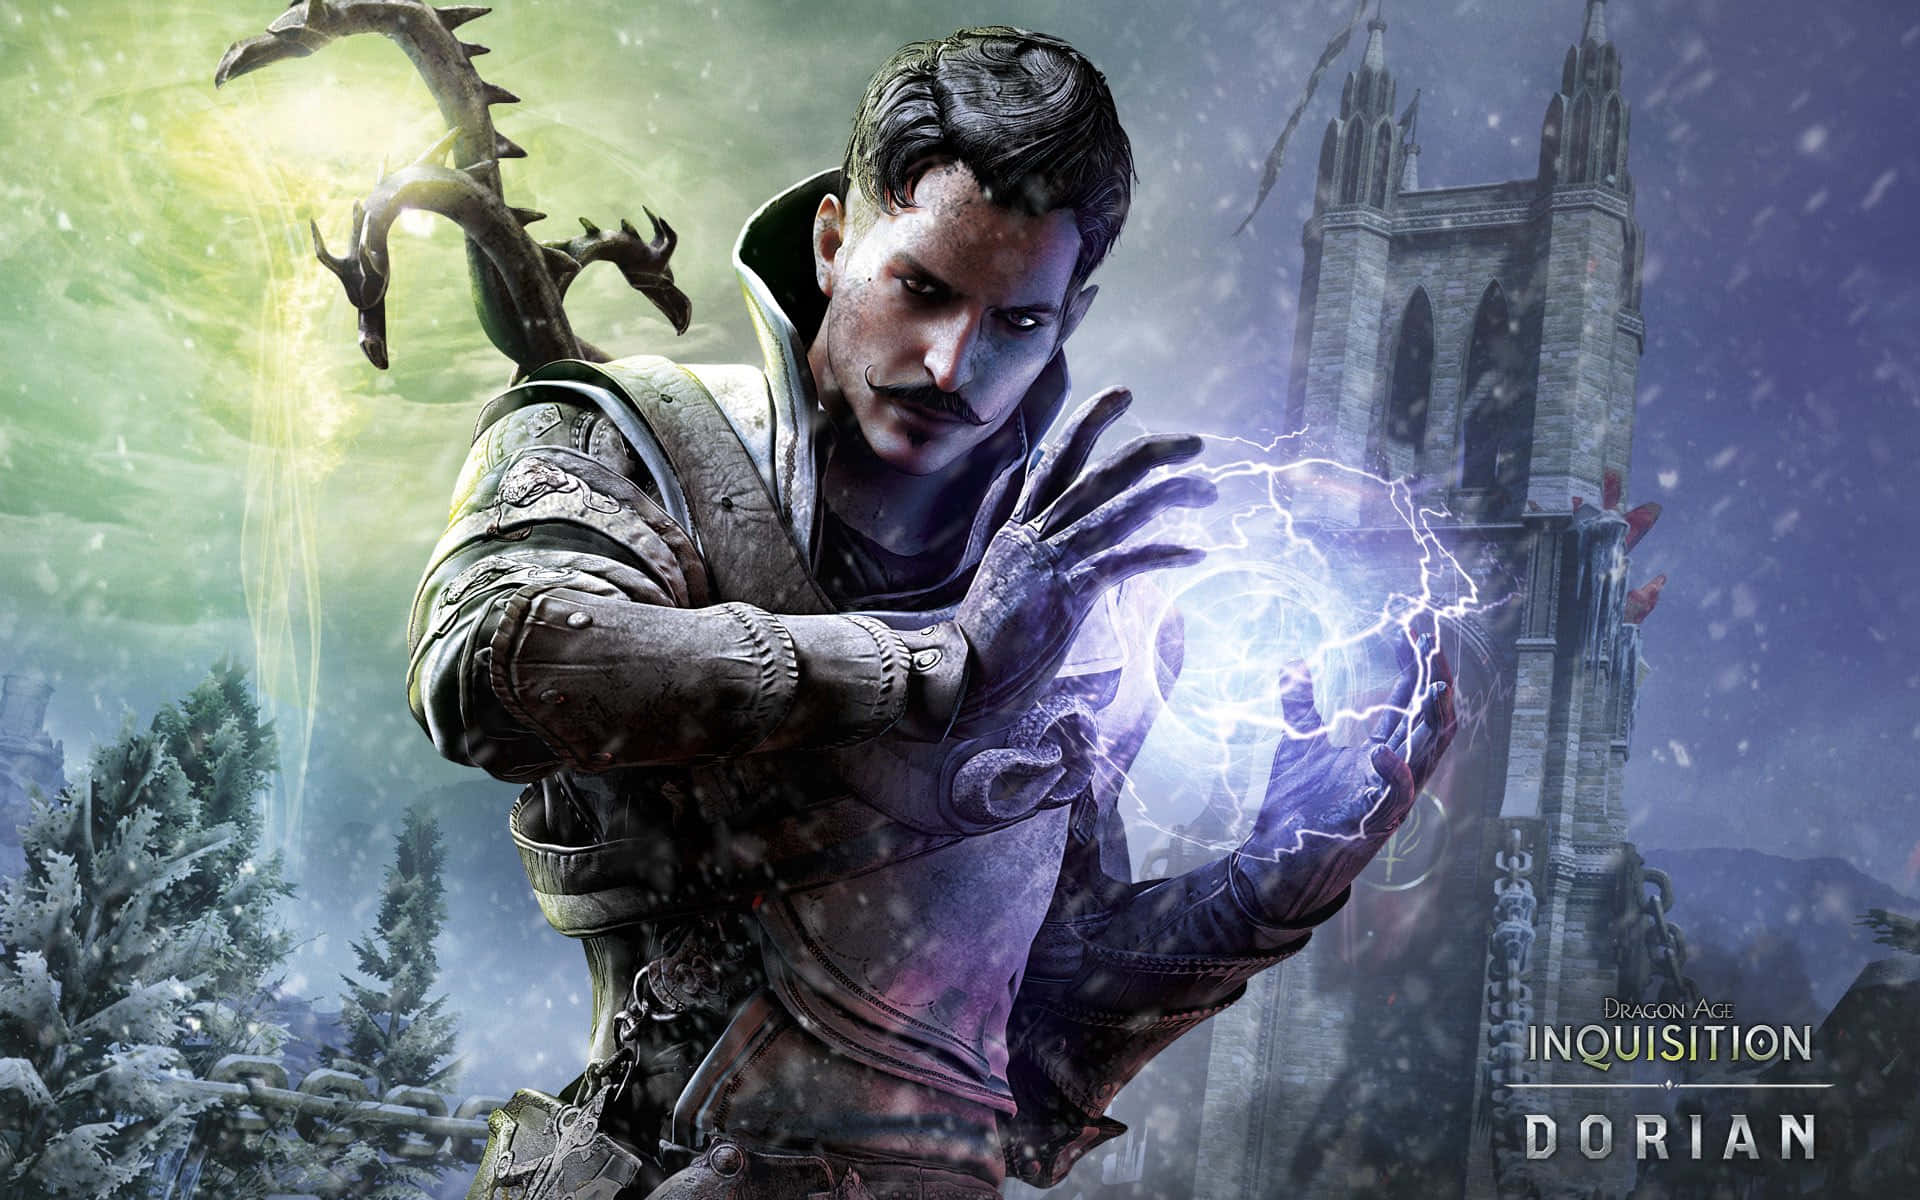 Live the Epic Fantasy Again with Dragon Age Inquisition